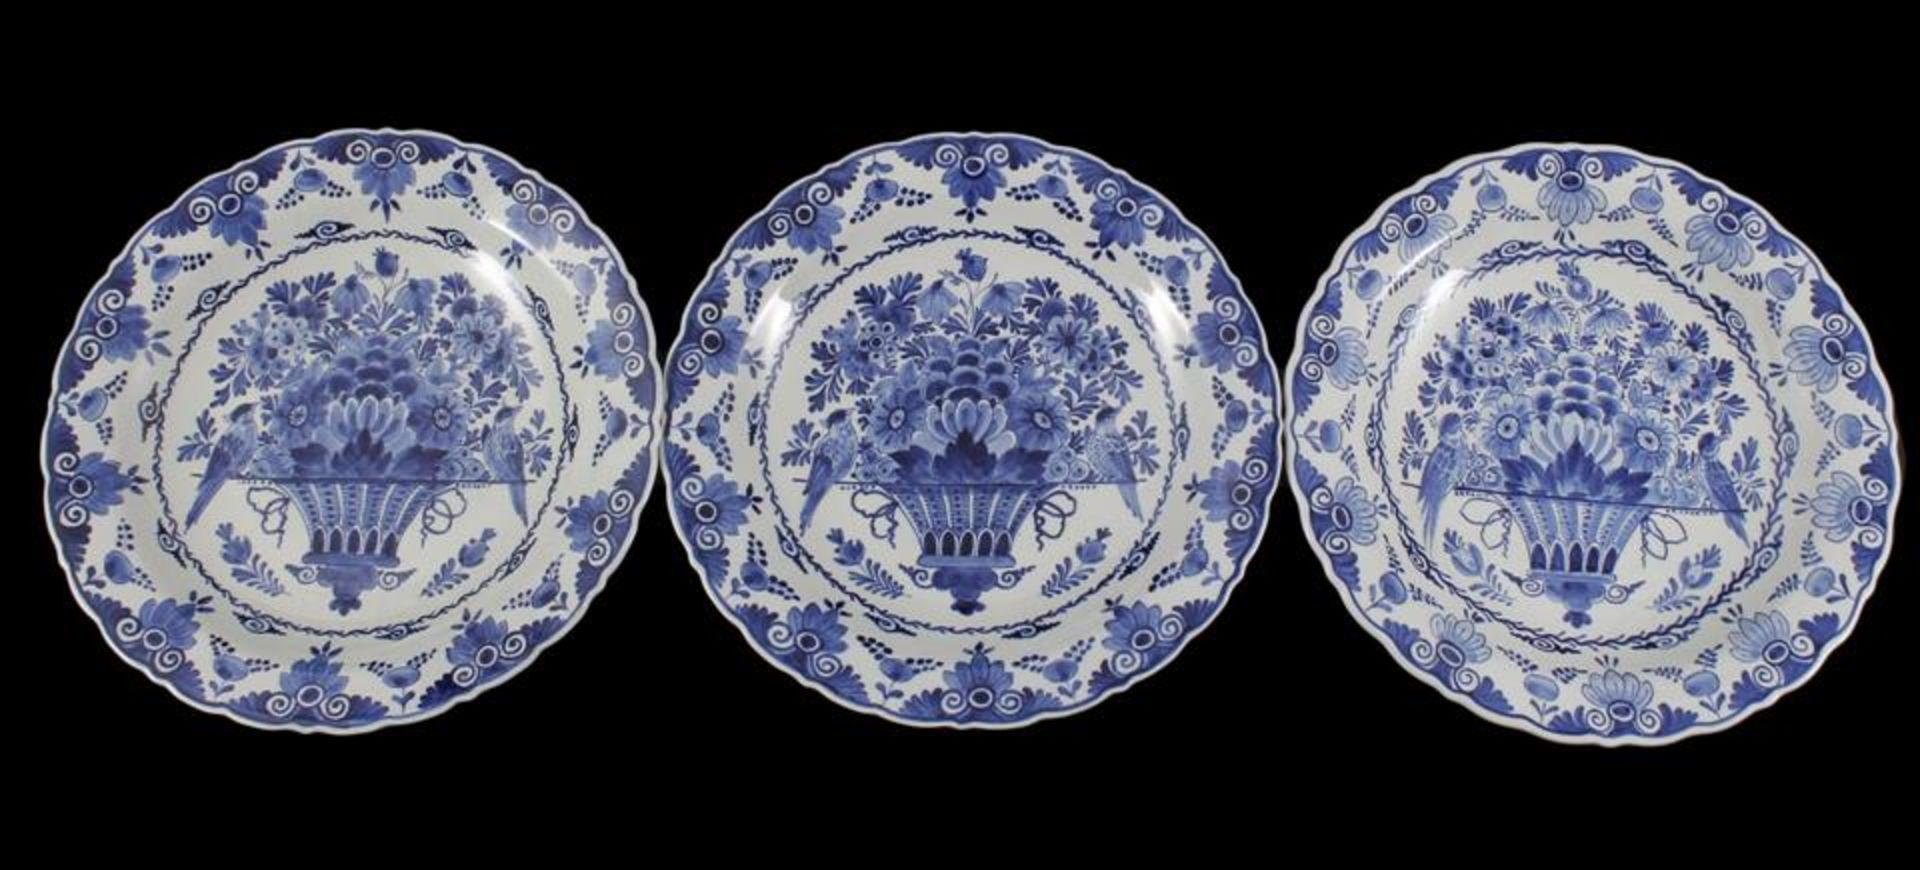 Porceleyne Fles 3 earthenware dishes with blue decoration of flowers, year markers 2 x 1941 (1